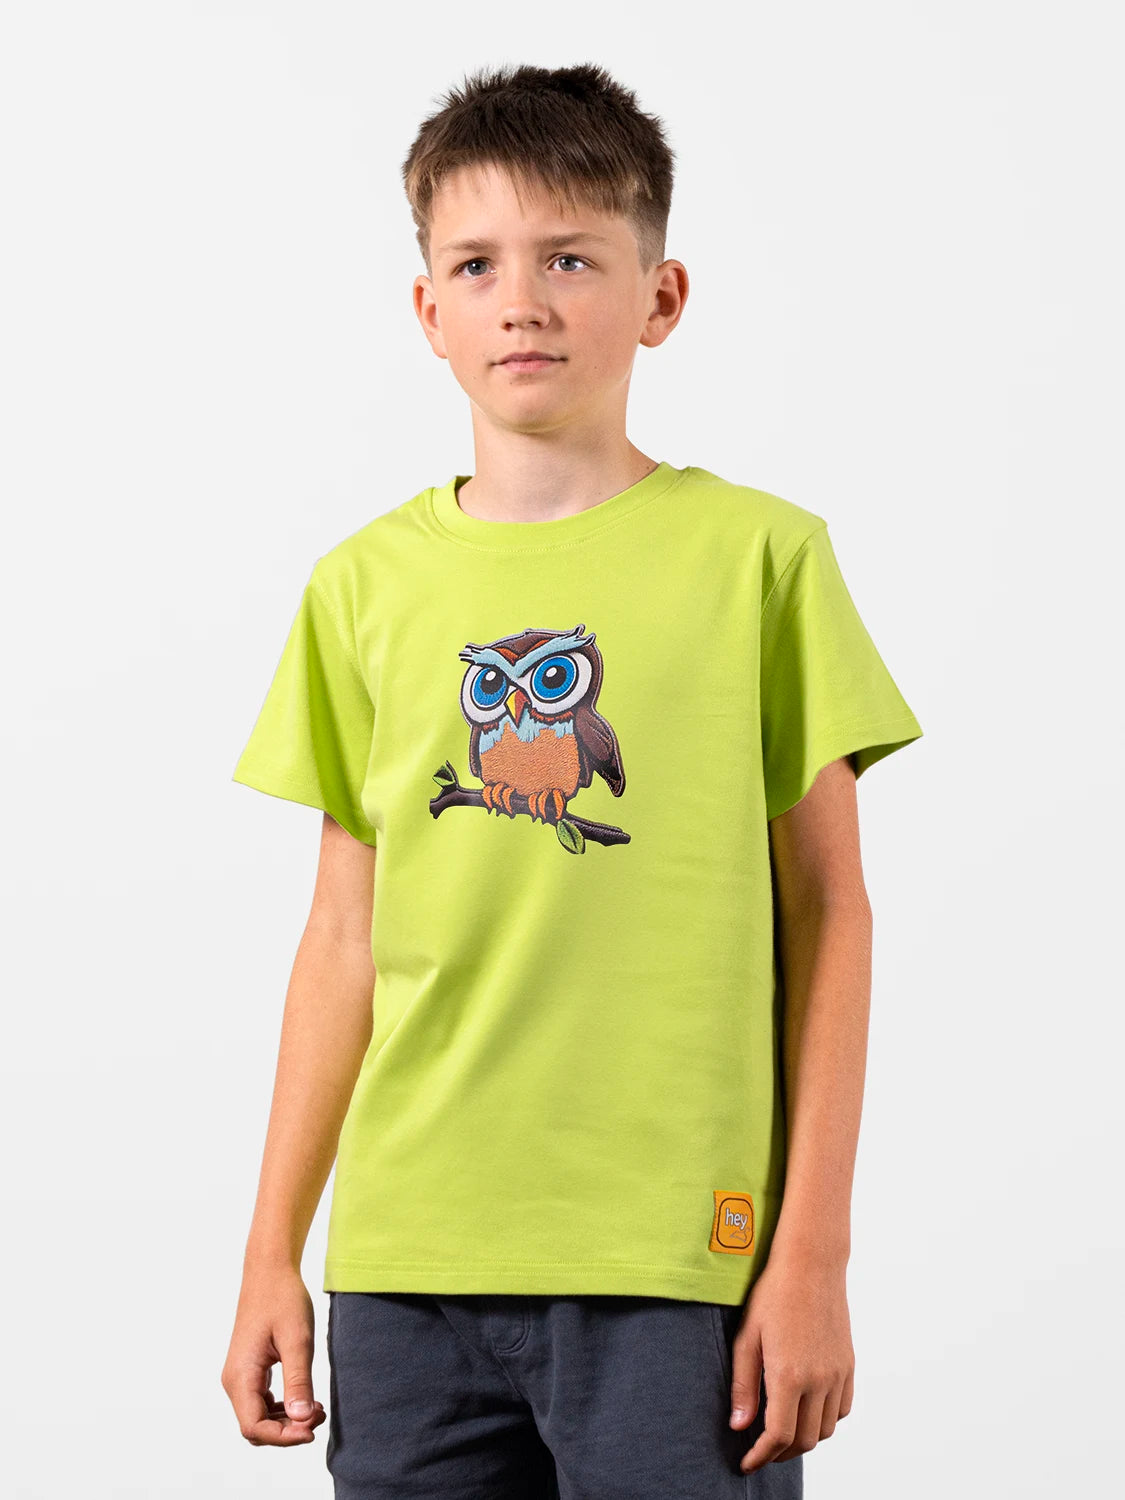 The Wise Owl Perfect Green T-shirt